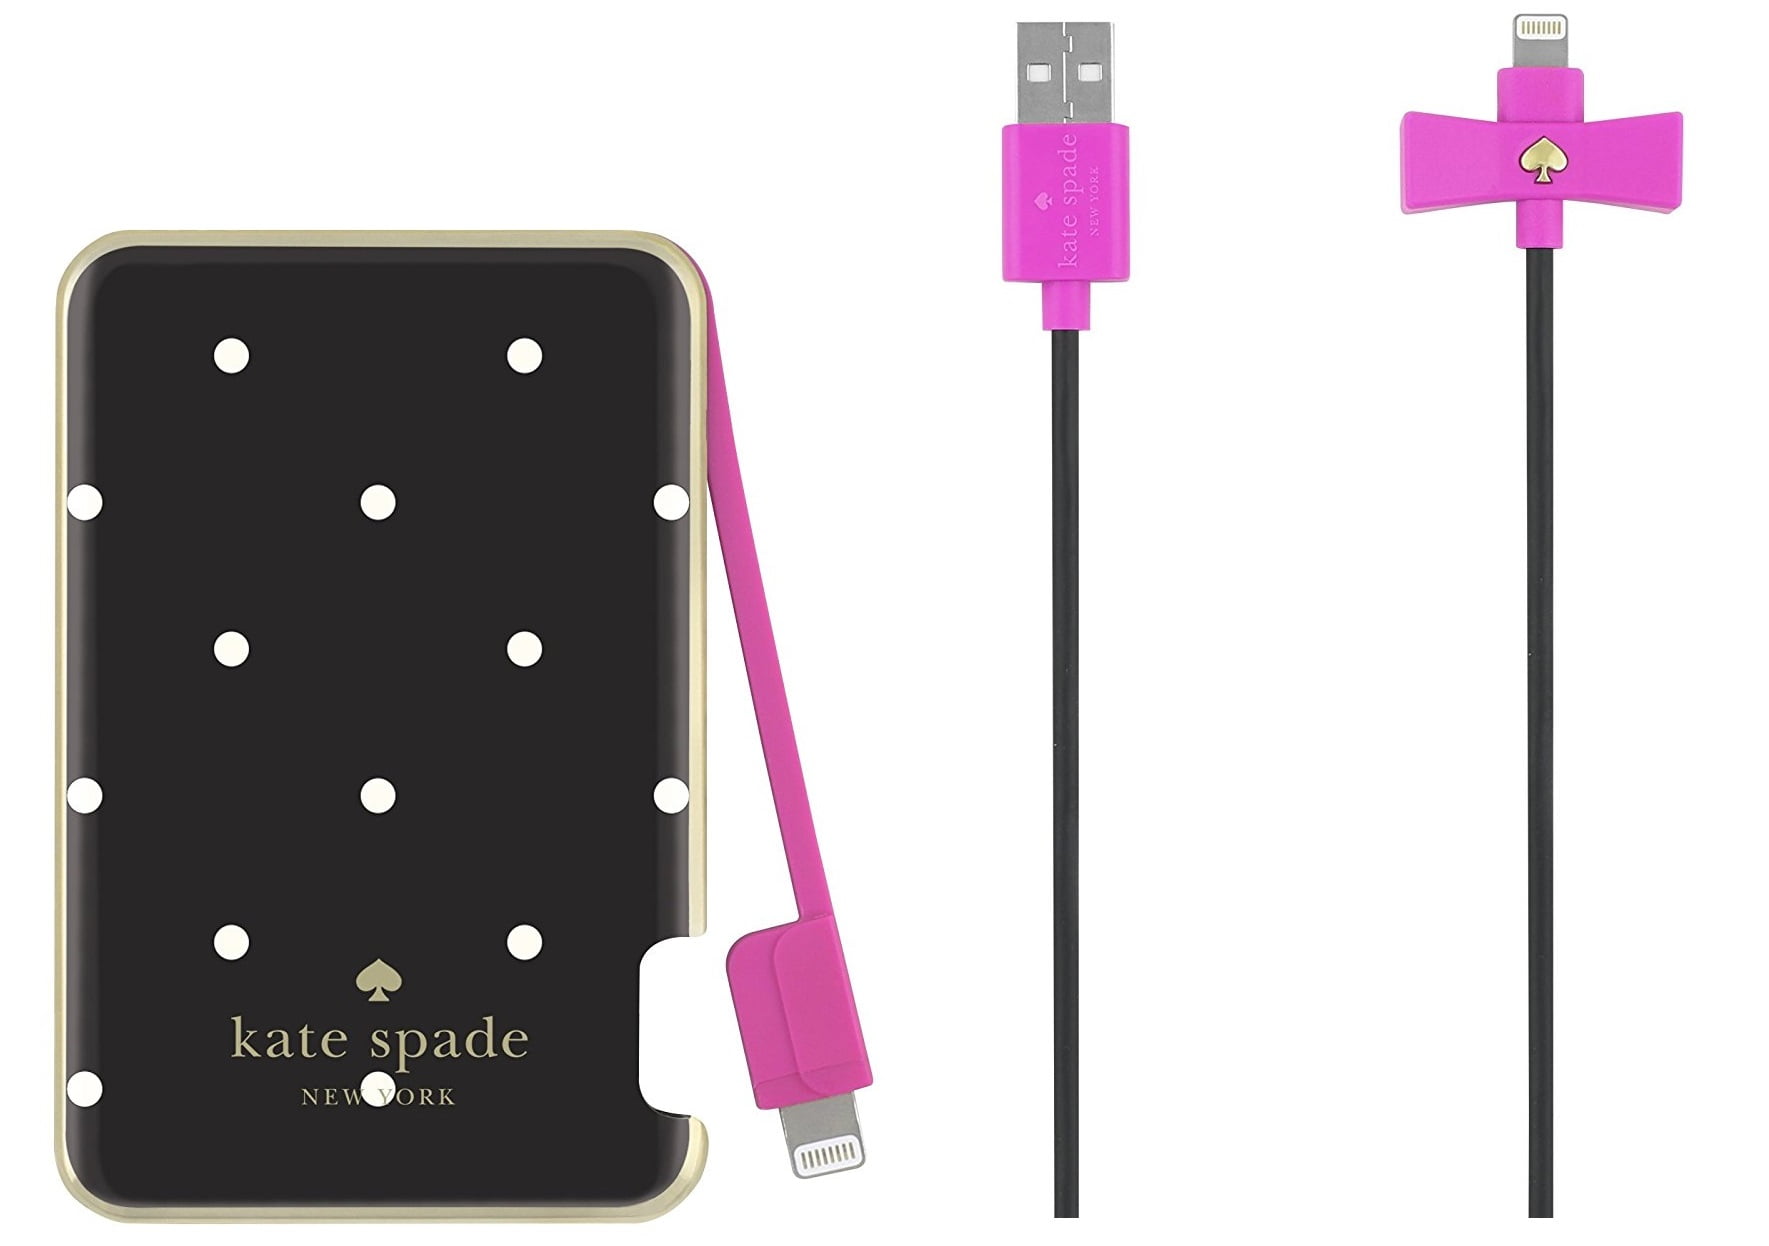 Kate Spade New York Combo Lightning MFI Charge & Sync Cable & Power Bank/Battery  Charger with Cable 